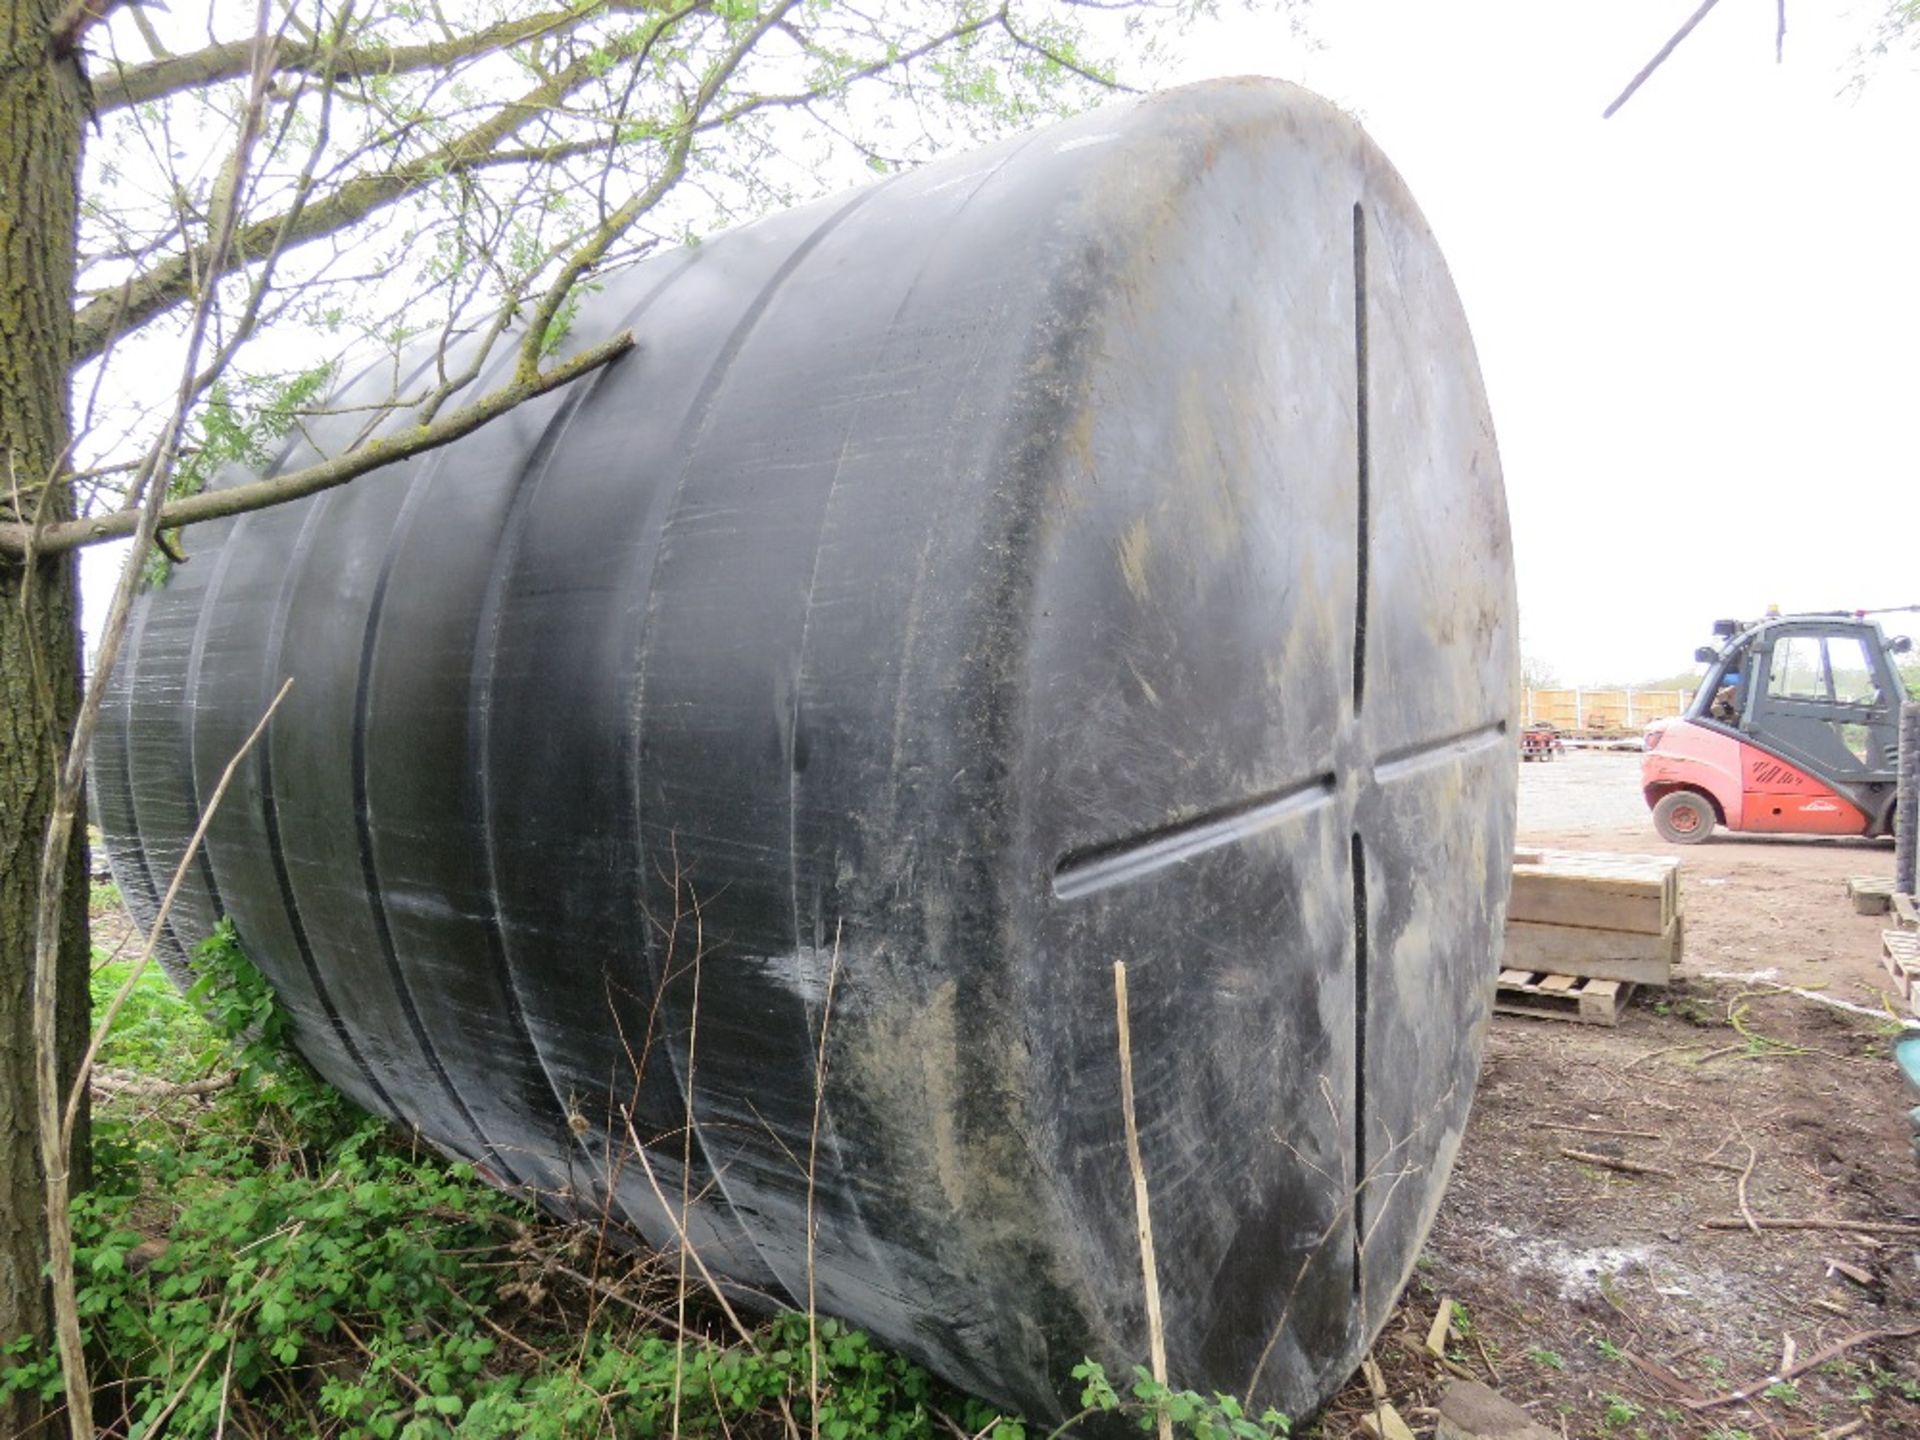 EXTRA LARGE WATER STORAGE TANK 10FT HEIGHT X 9FT DIAMETER APPROX. DAMAGED IN THE MIDDLE AS SHOWN. EX - Image 2 of 10